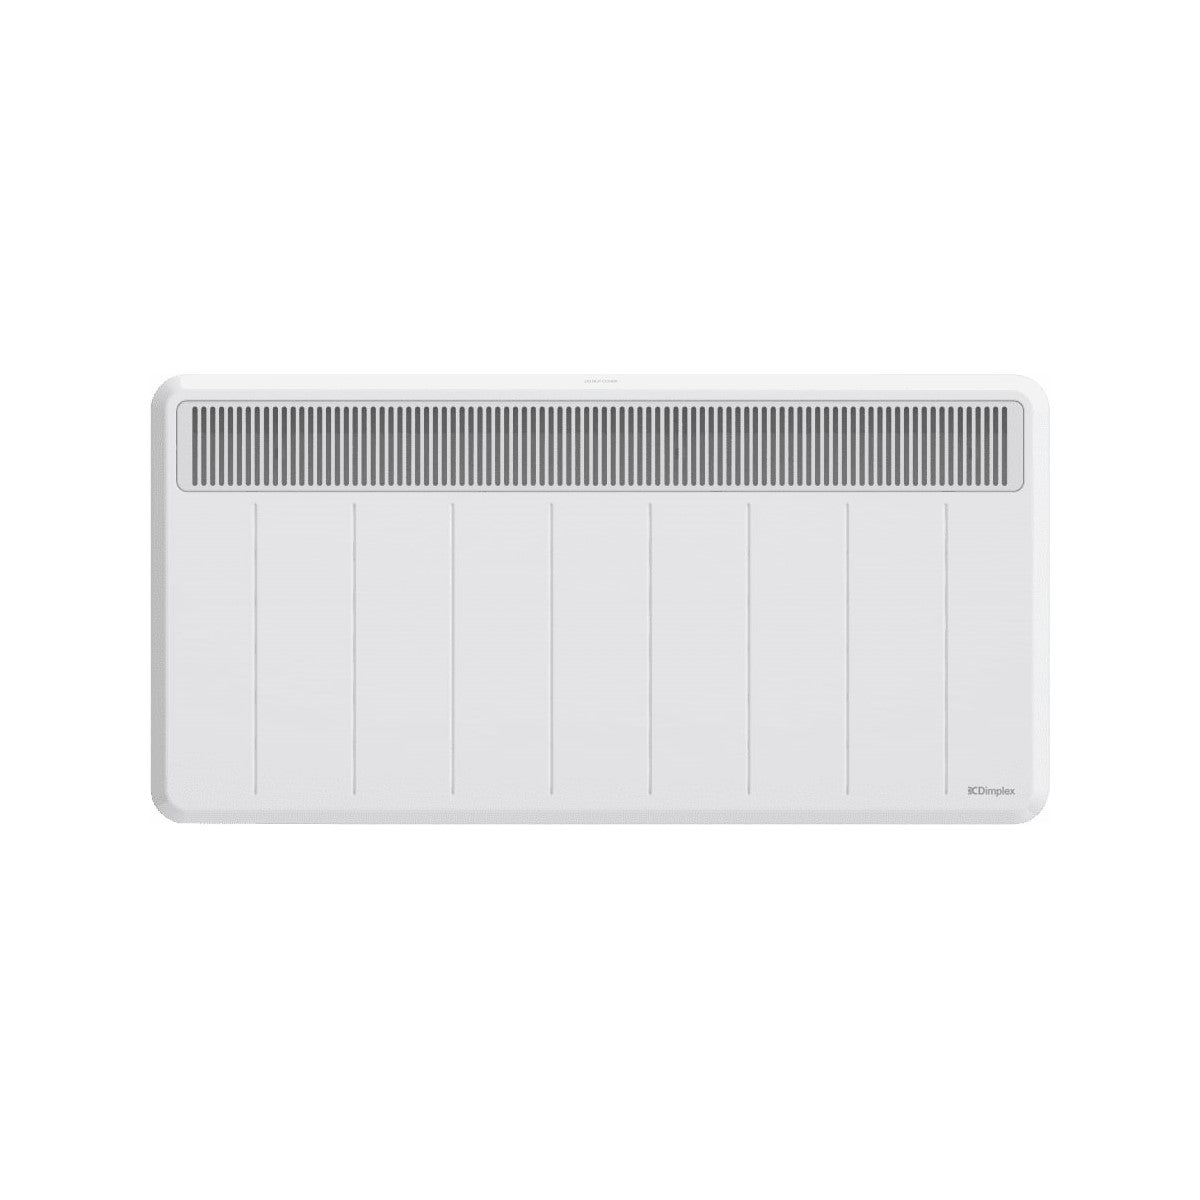 Image of a Dimplex EcoElectric 3000W PLXC300E on a white background